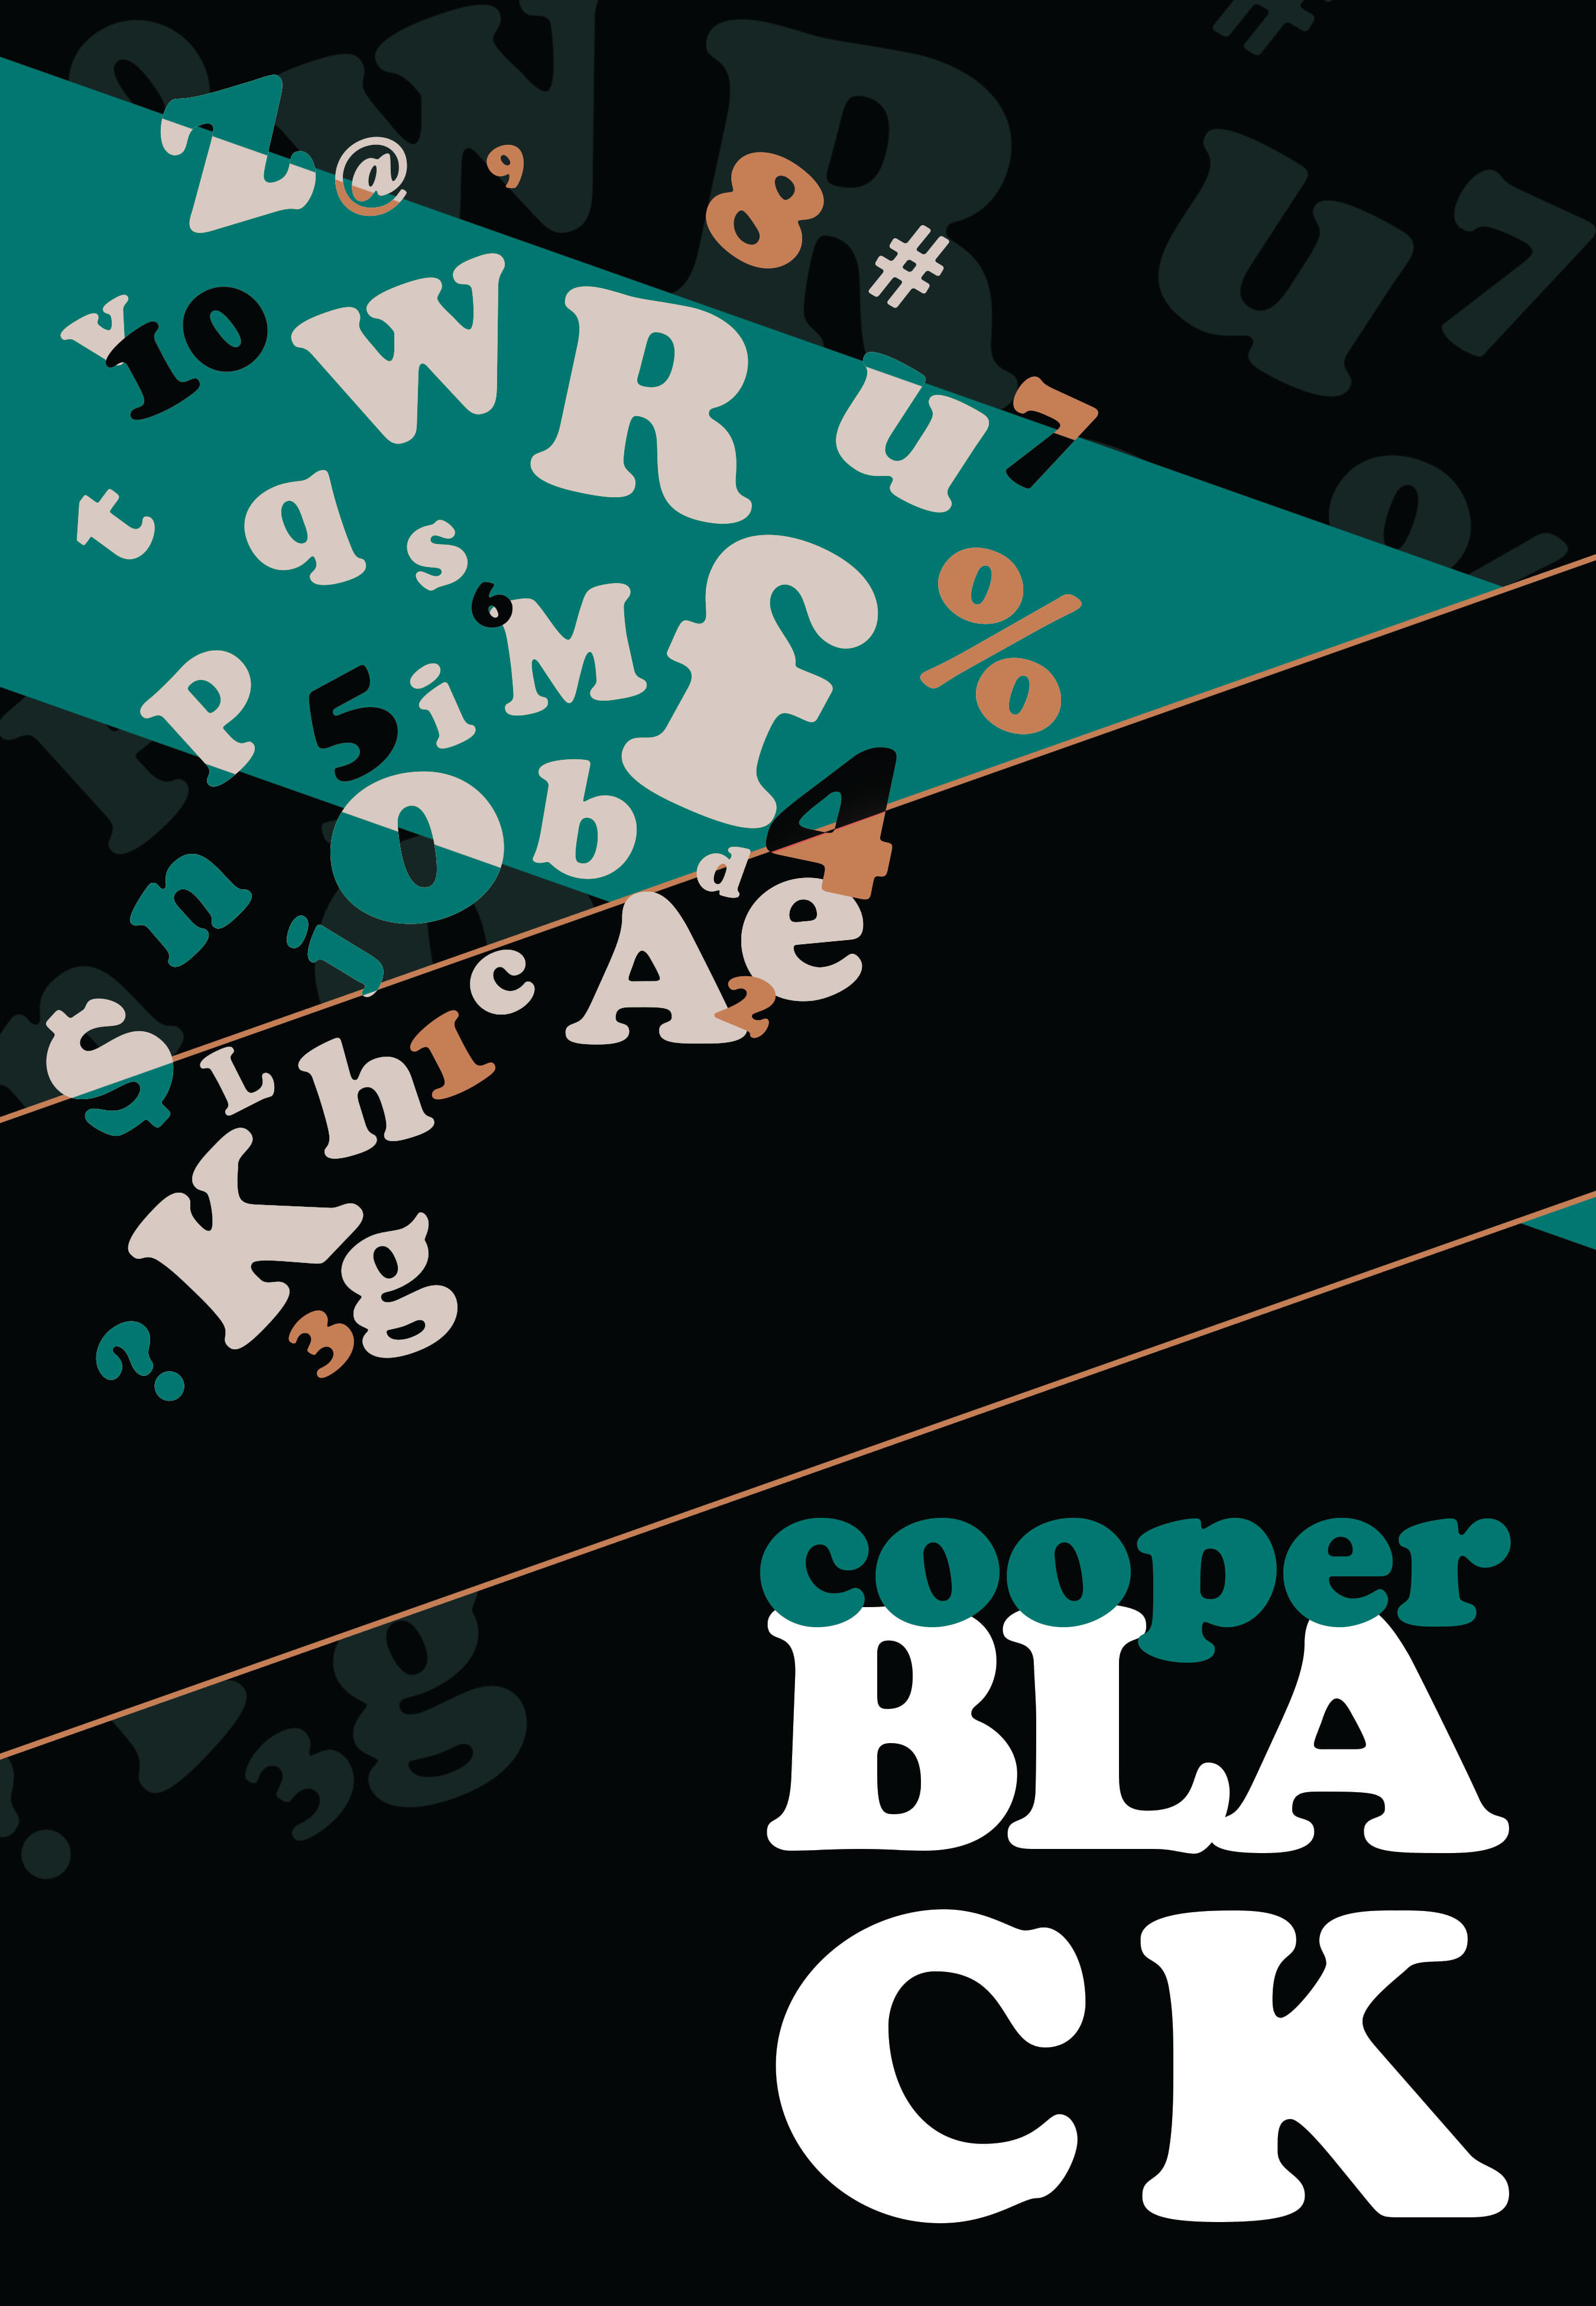 cooper Black poster with letters, numbers, and symbols on upper left corner